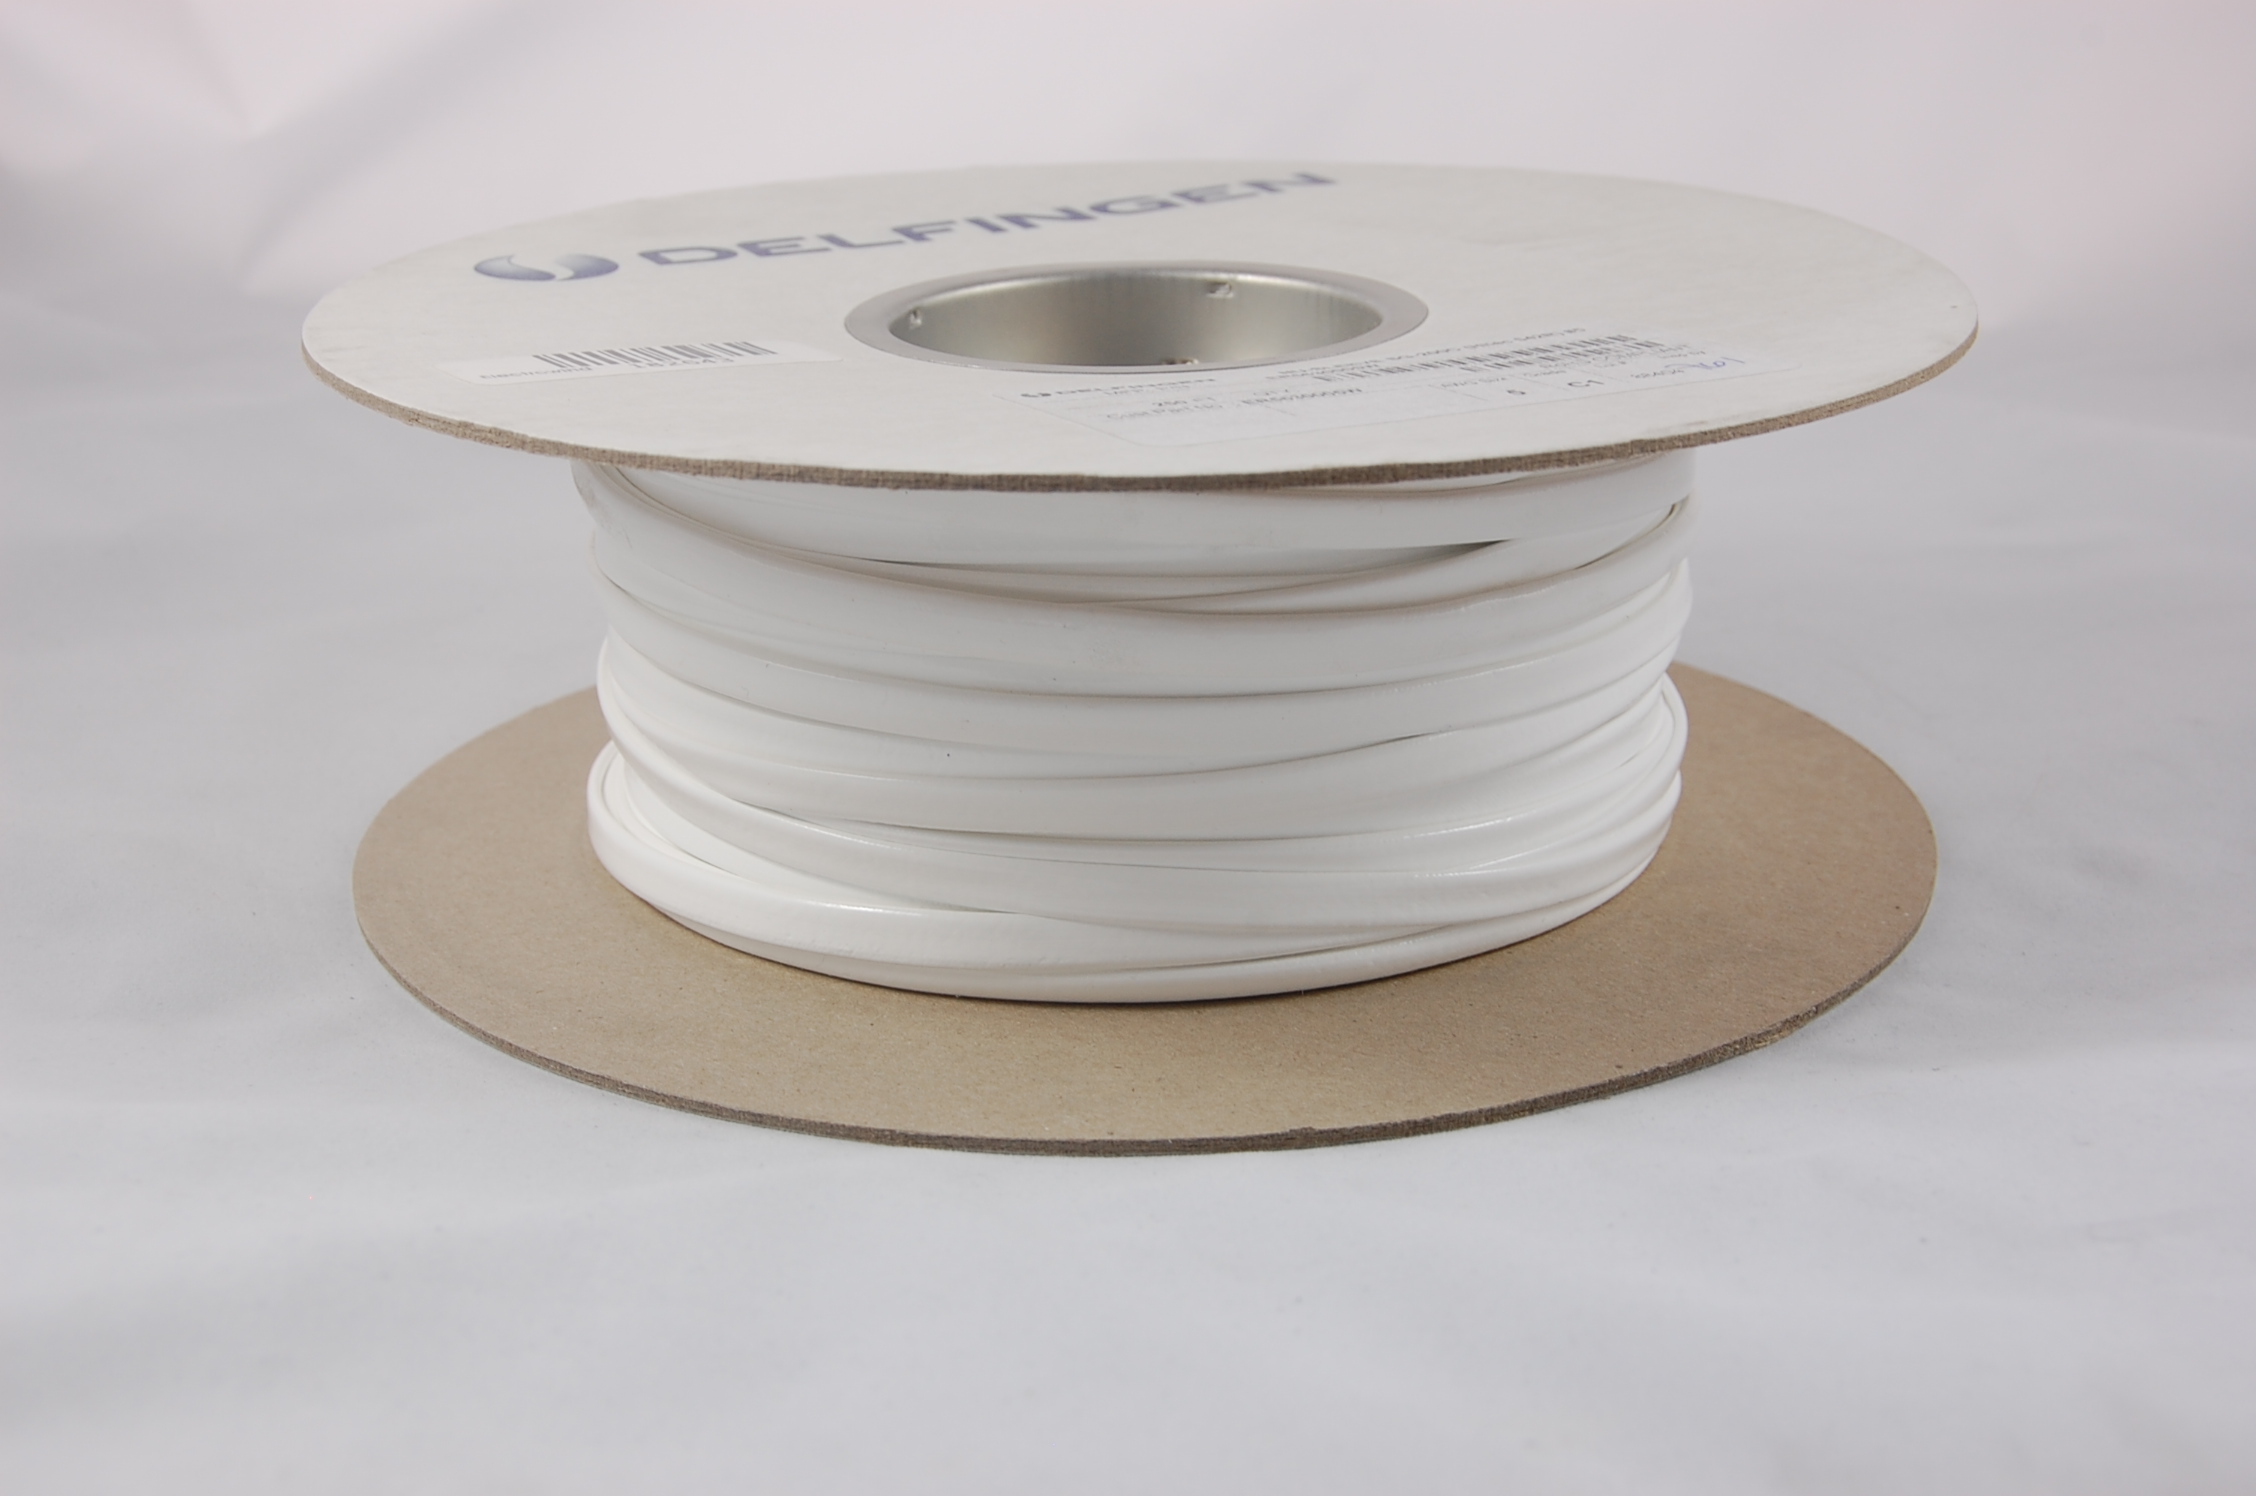 #20 AWG NU-SLEEVE SG-200 C-1 (2500V) Silicone Rubber Coated Braided Fiberglass Sleeving (542F) 200°C, white, 500 FT per spool